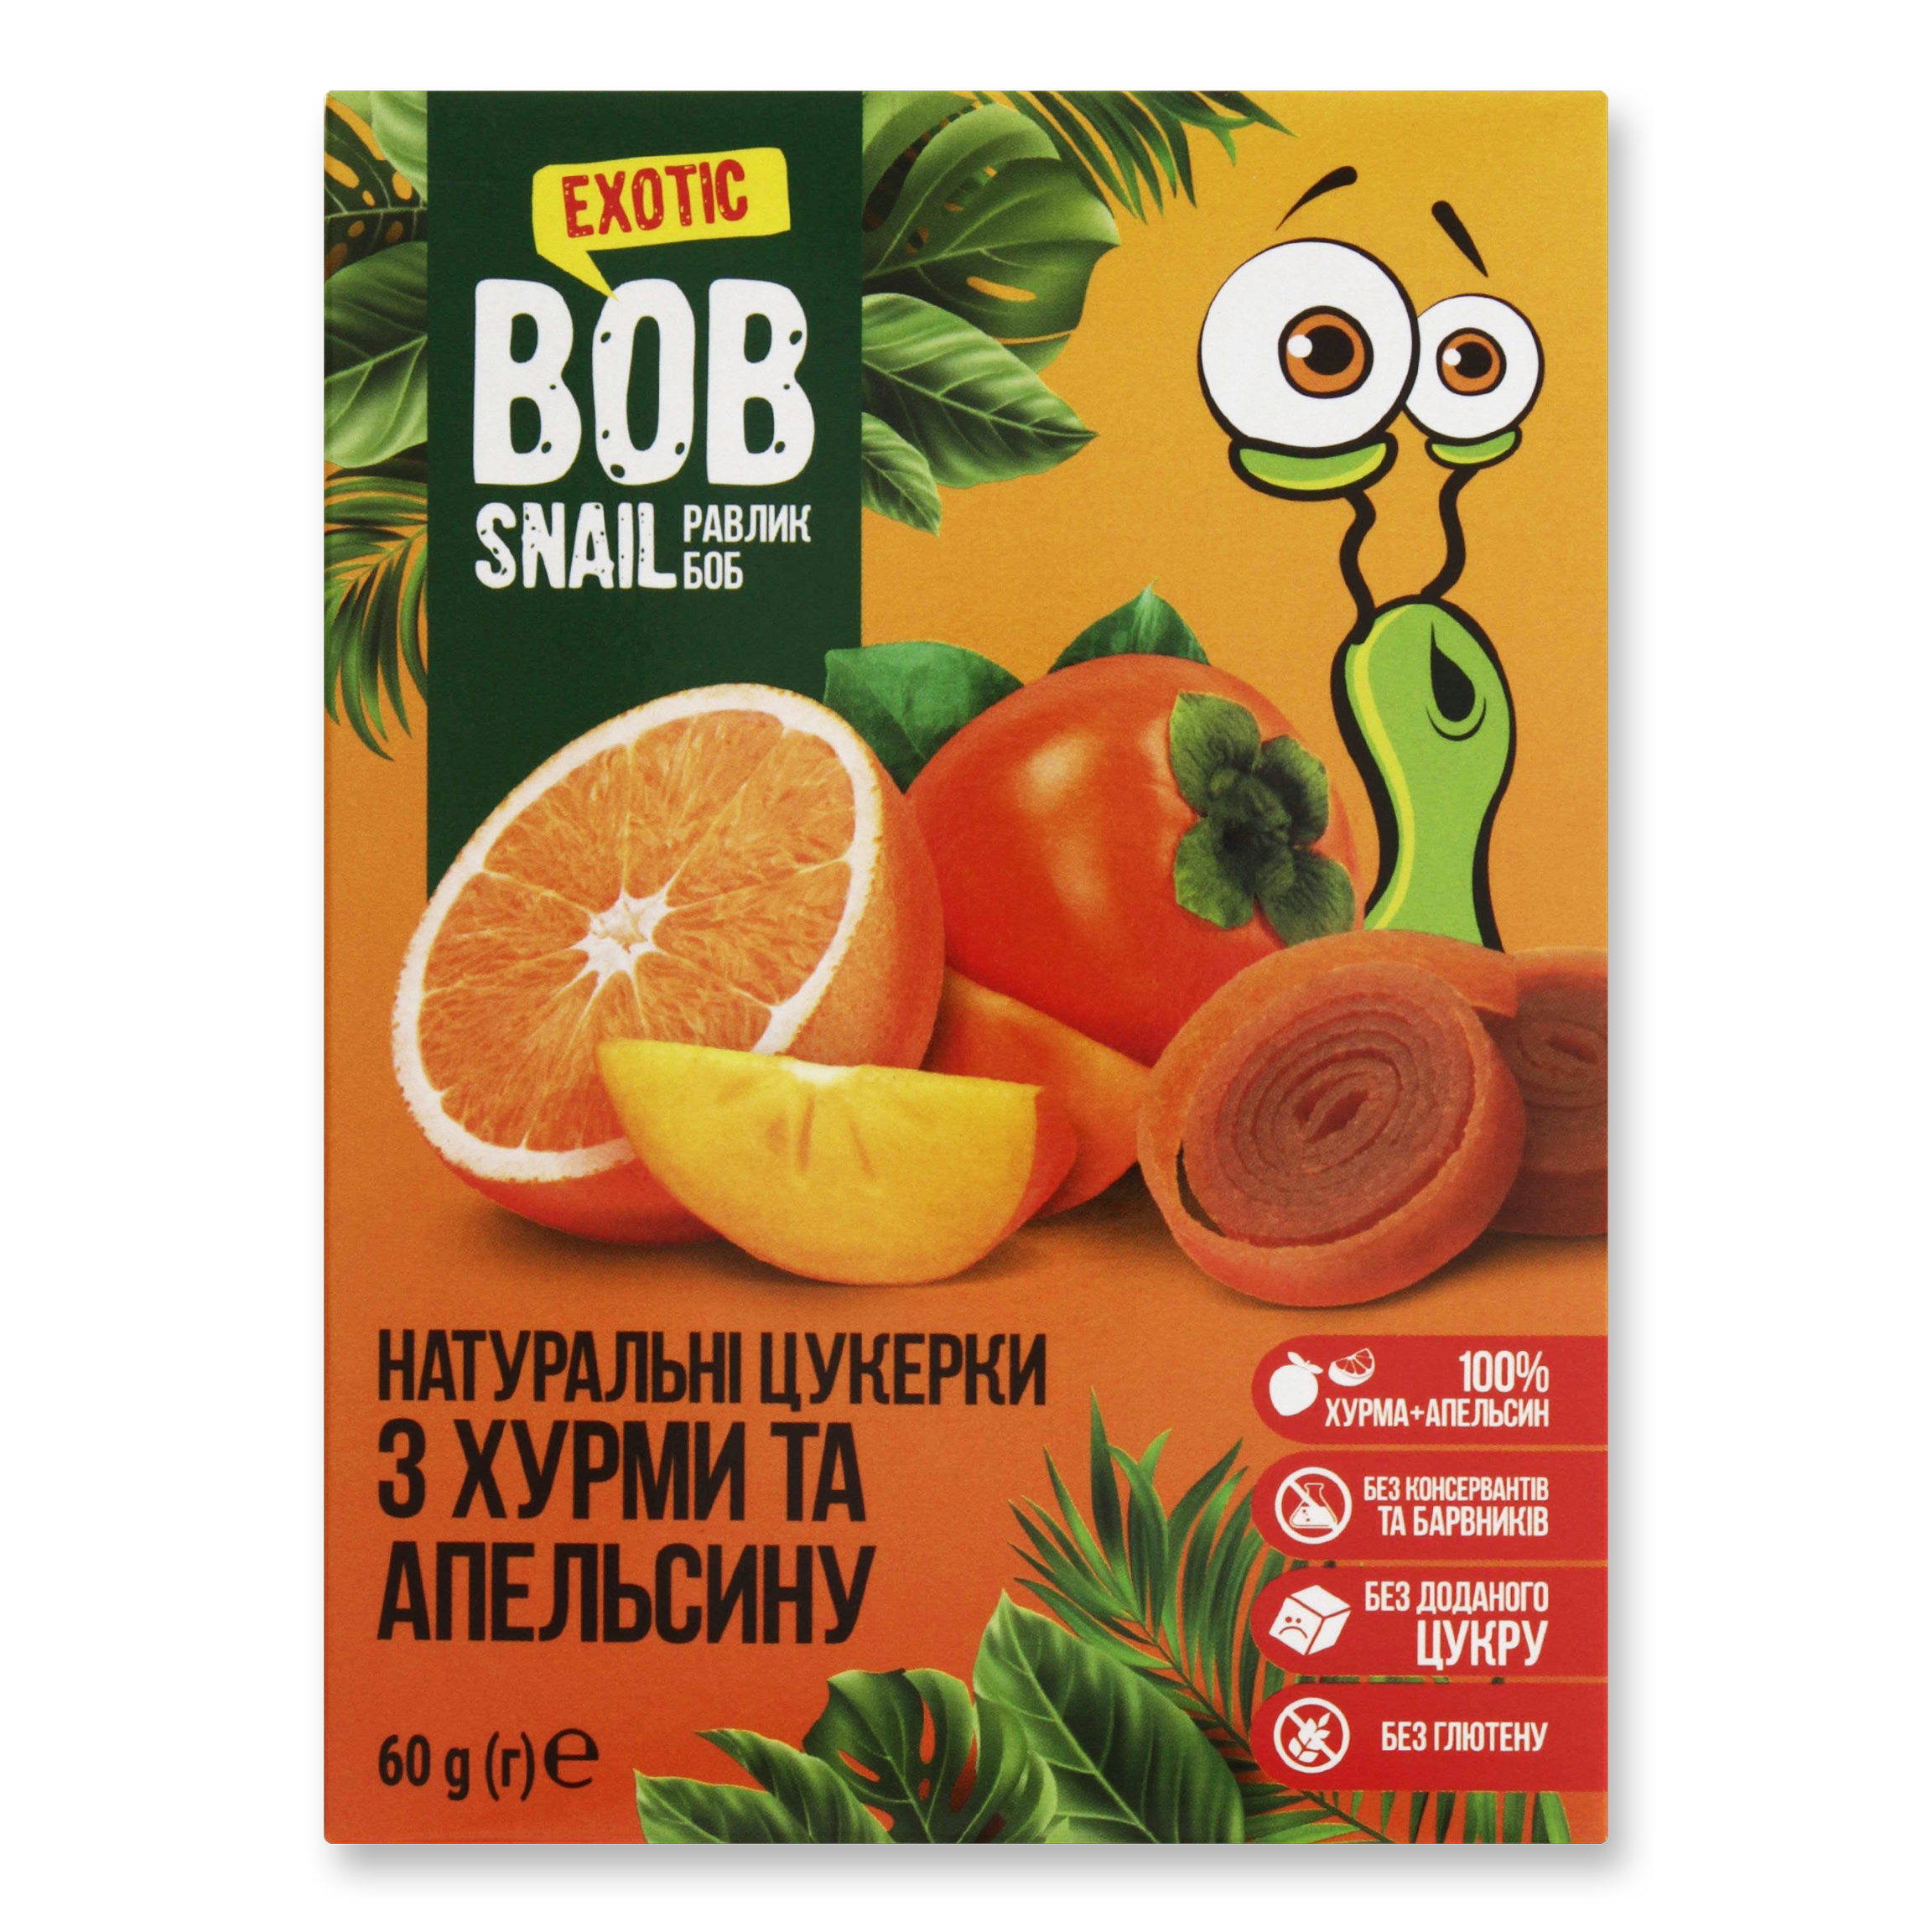 Candies Bob Snail from Persimmon and Orange Natural 60g